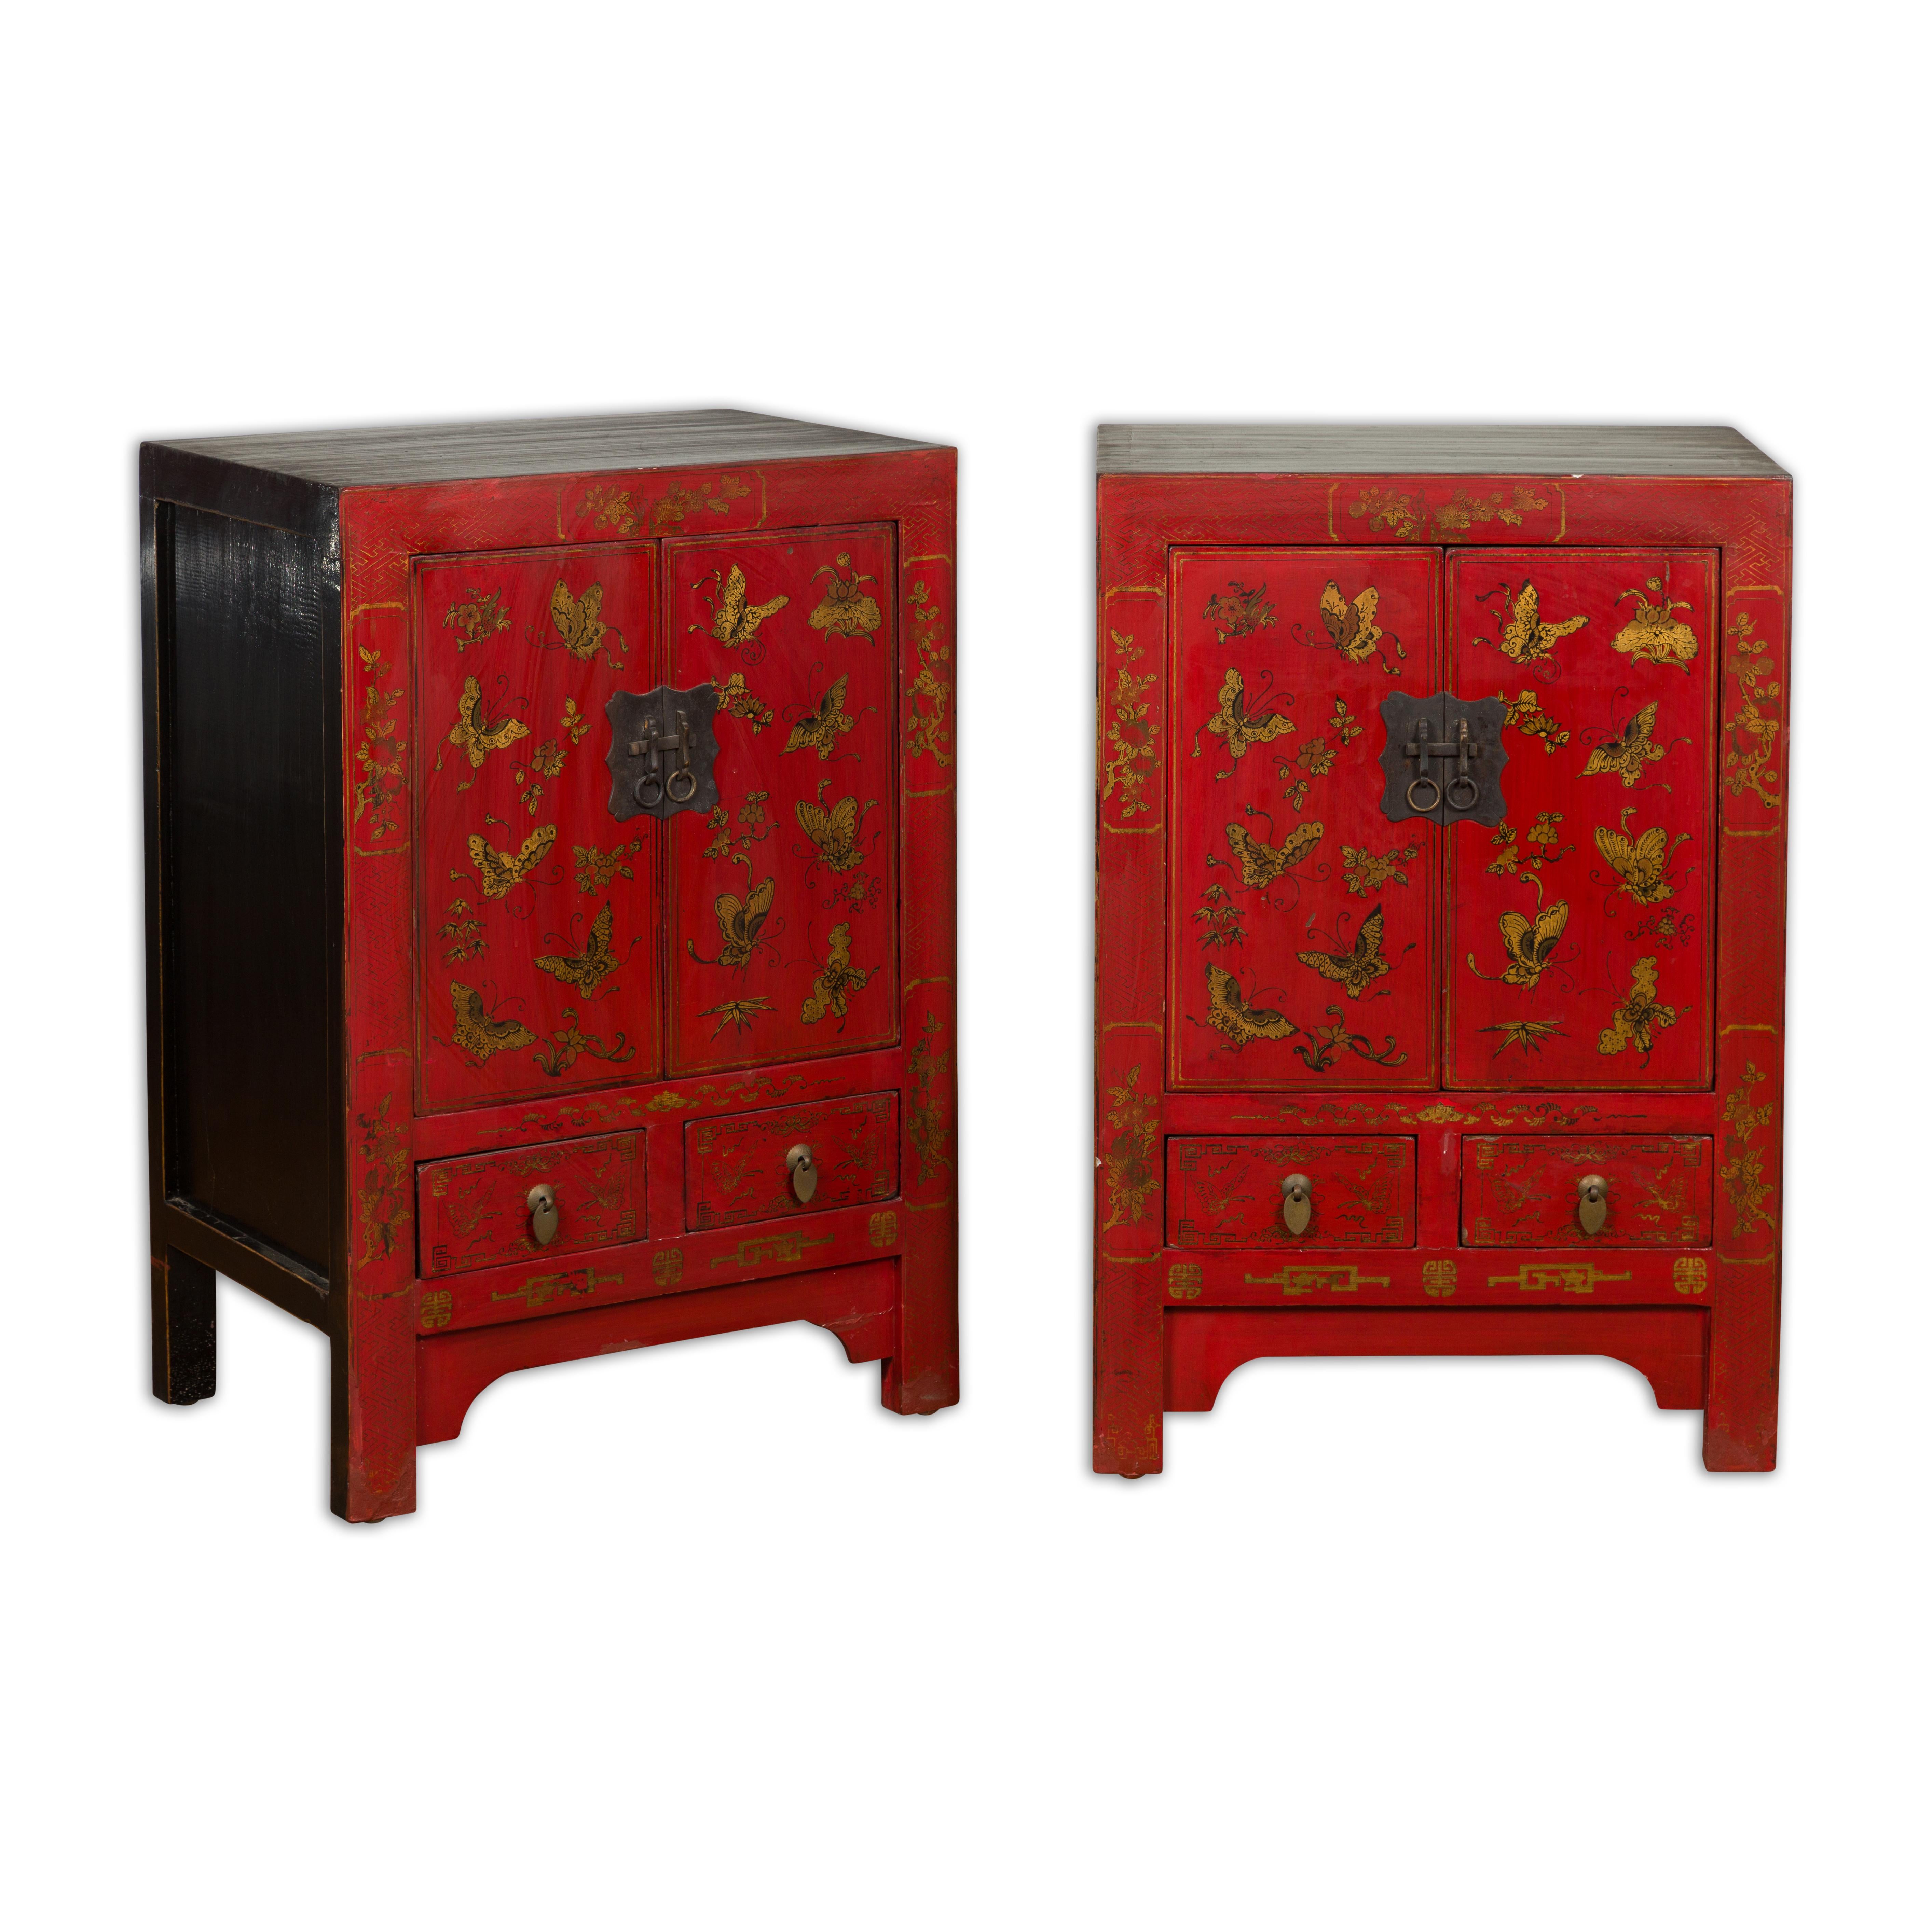 Pair of Chinese Qing Dynasty Red Lacquer Bedside Cabinets with Butterfly Décor For Sale 10